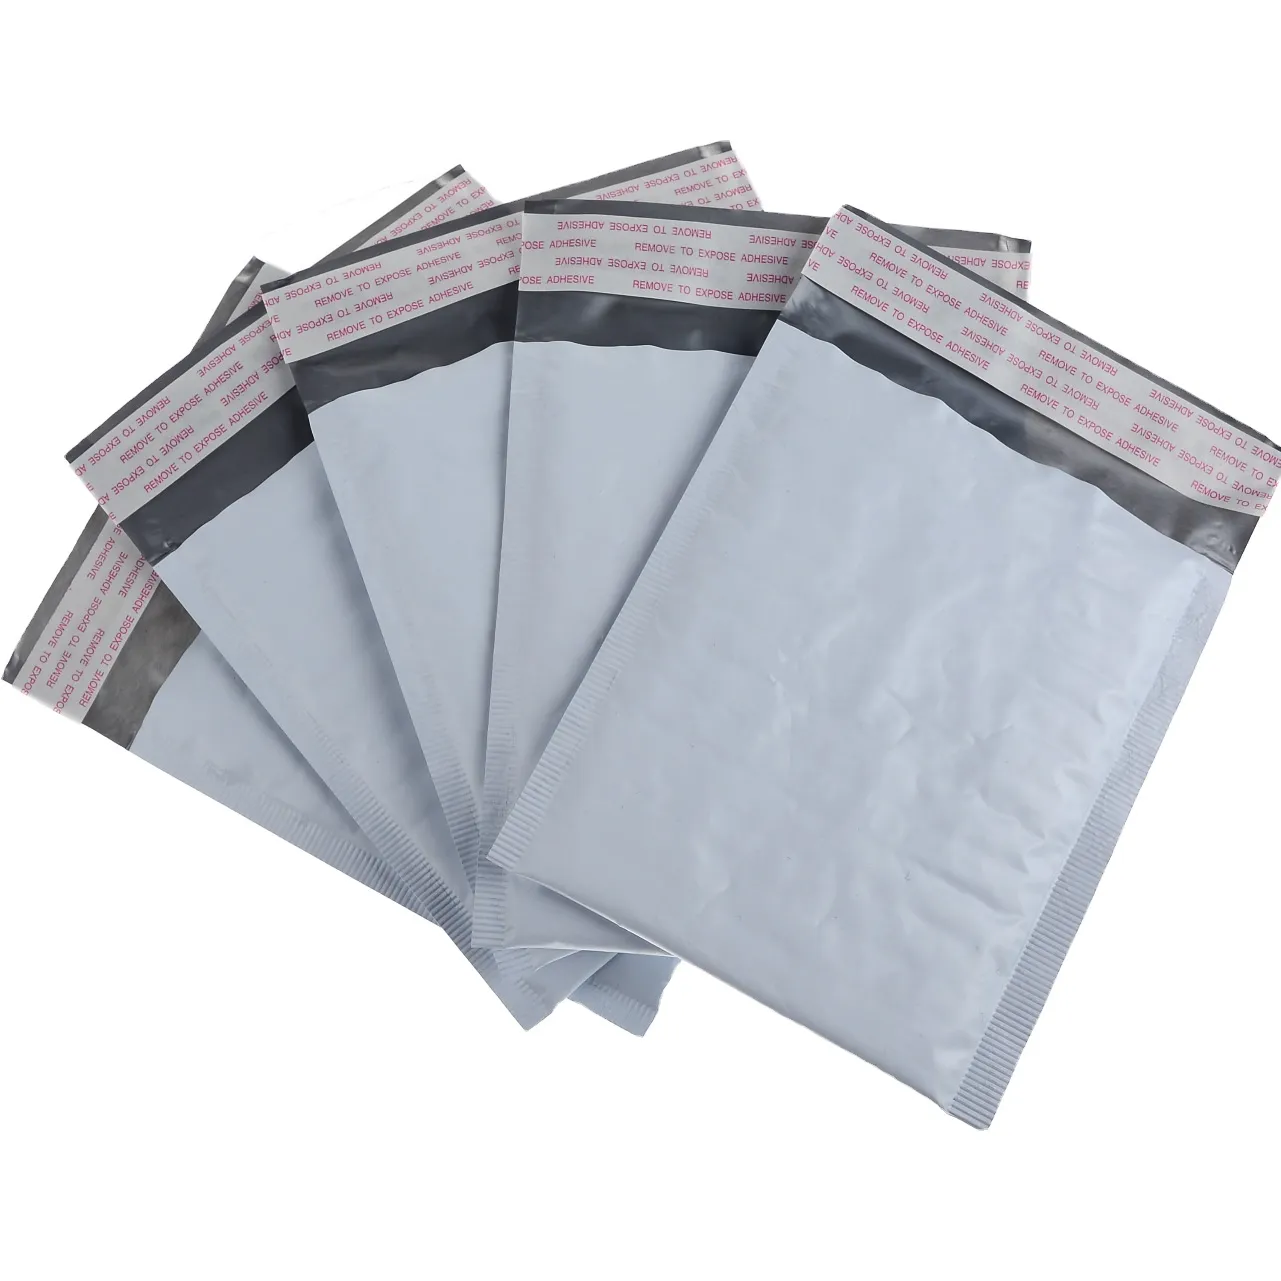 Custom Printed Envelope Air Padded Bubble Mailers Shipping Packaging Mailing Bags Poly Bubble Mailers Courier Delivery Rose Gold